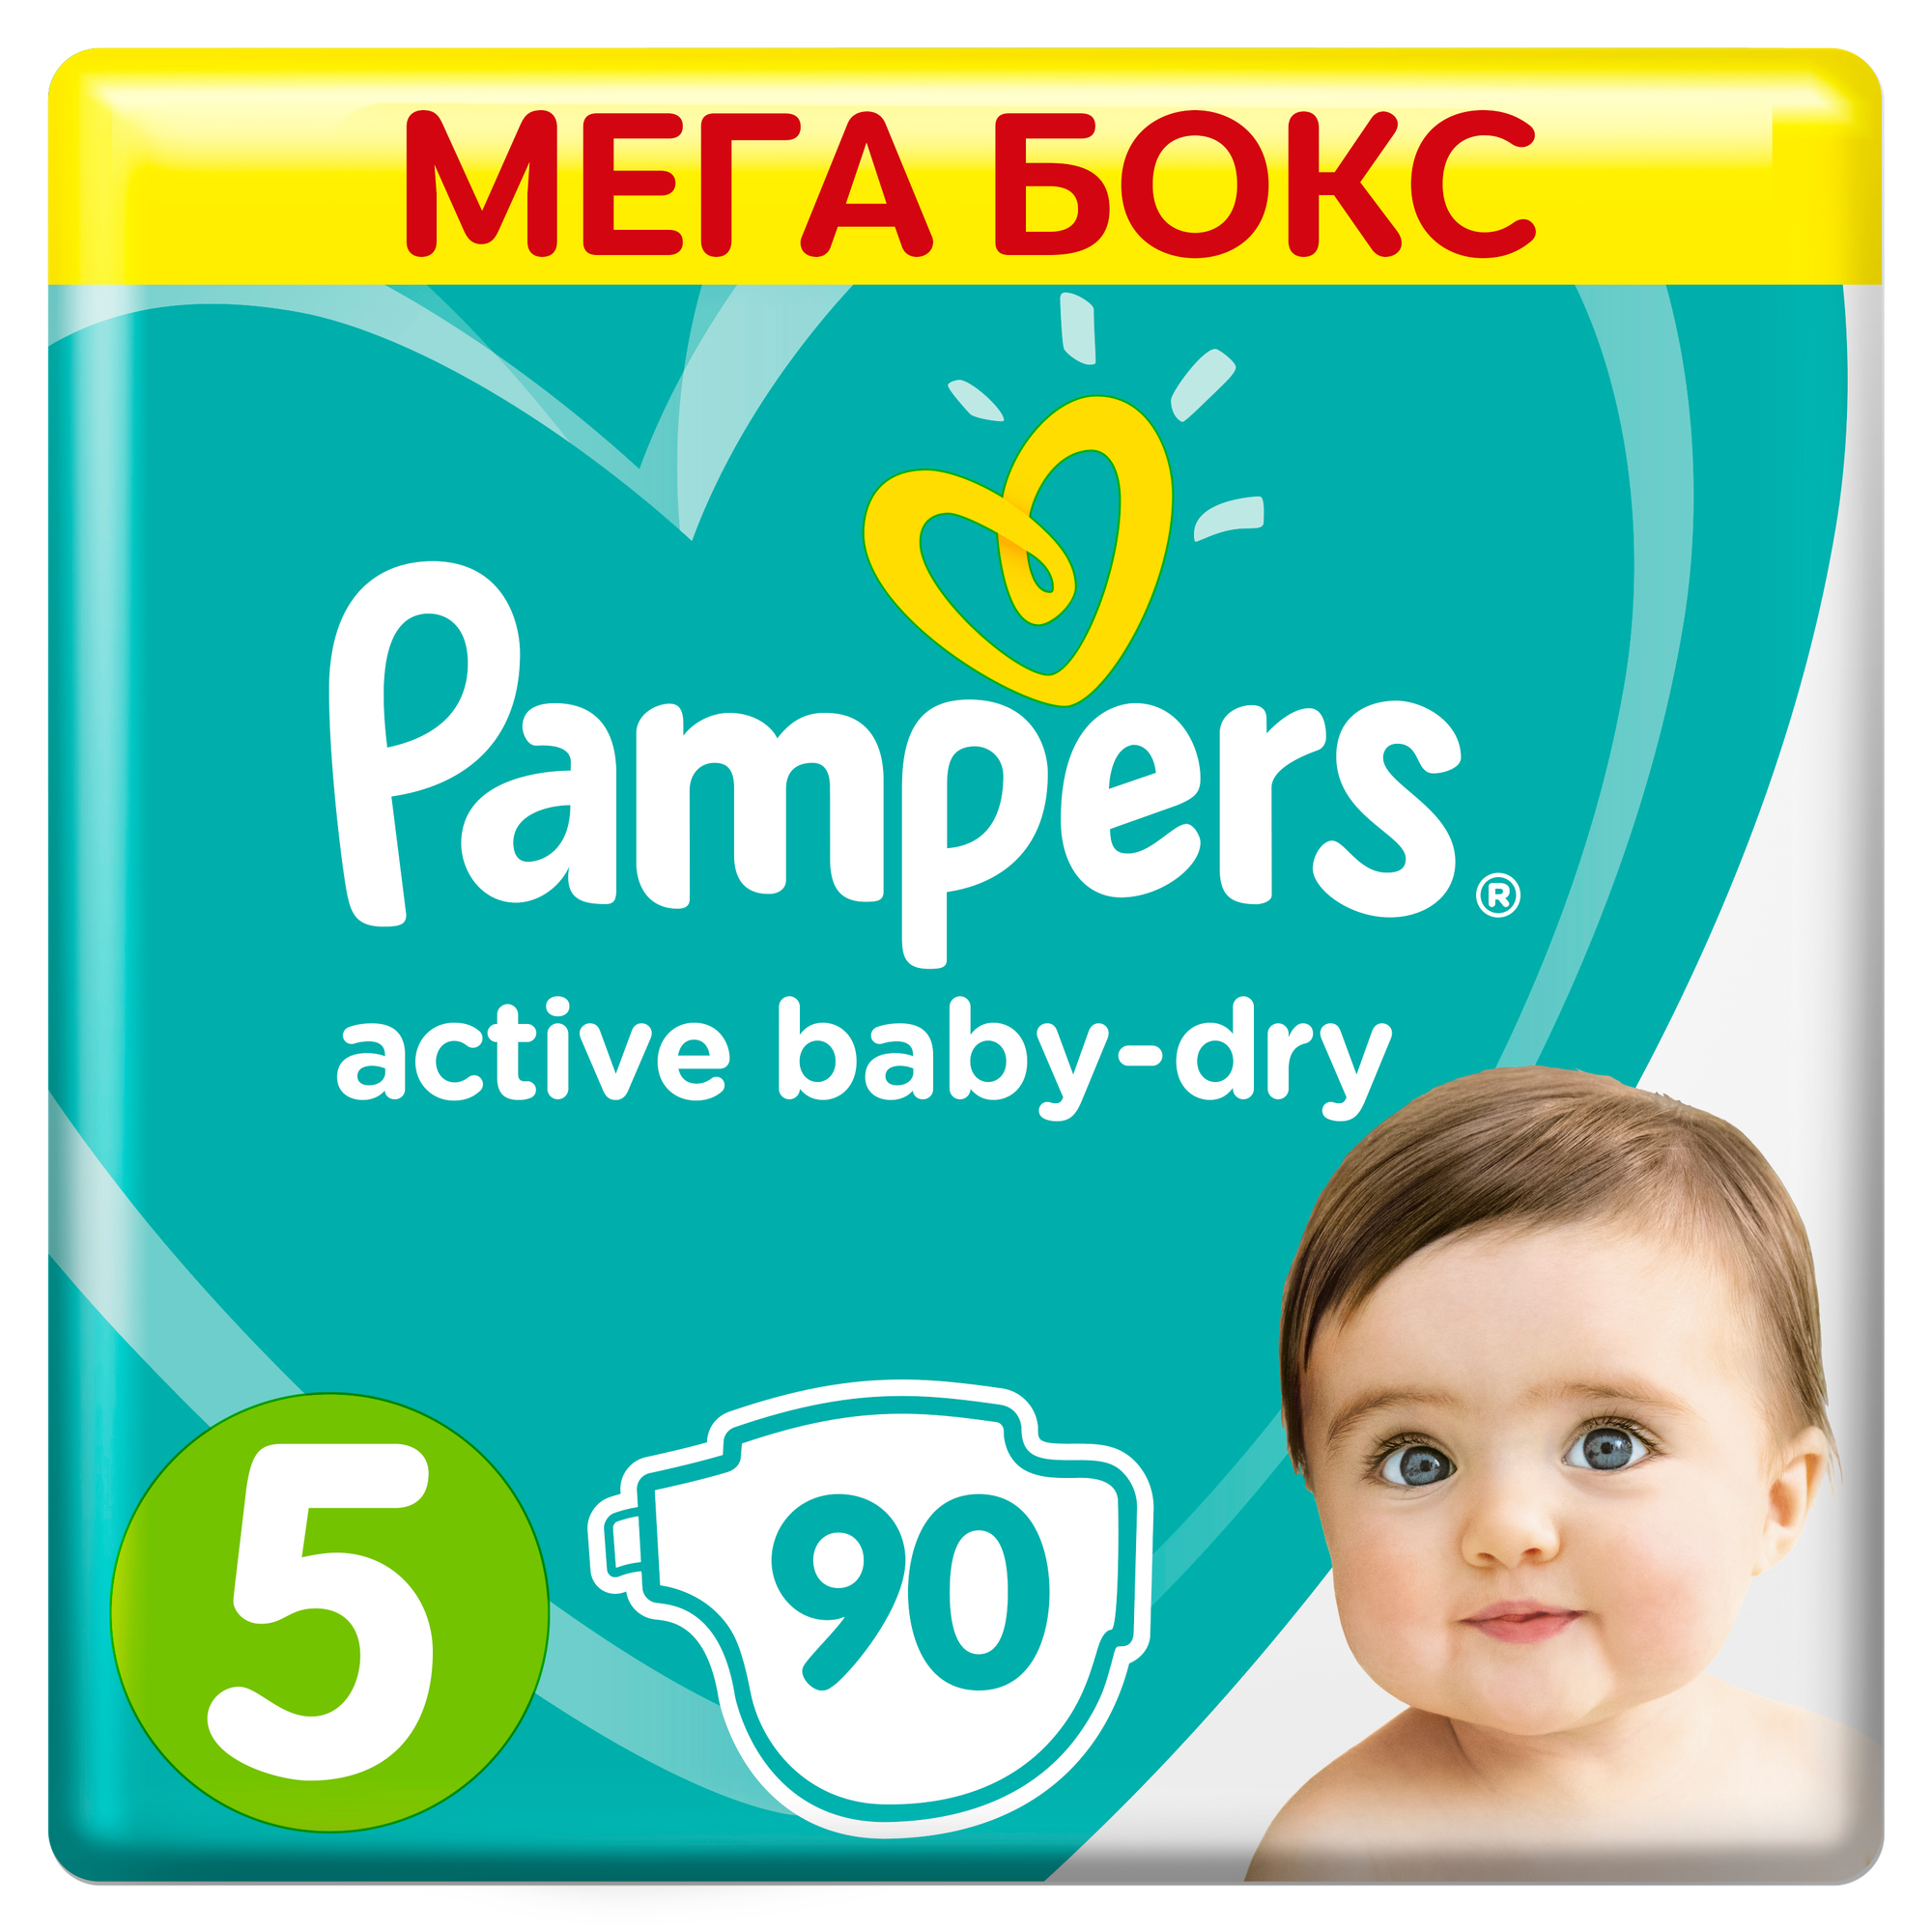  Pampers Active Baby-Dry 1116 ,  5, 90 .